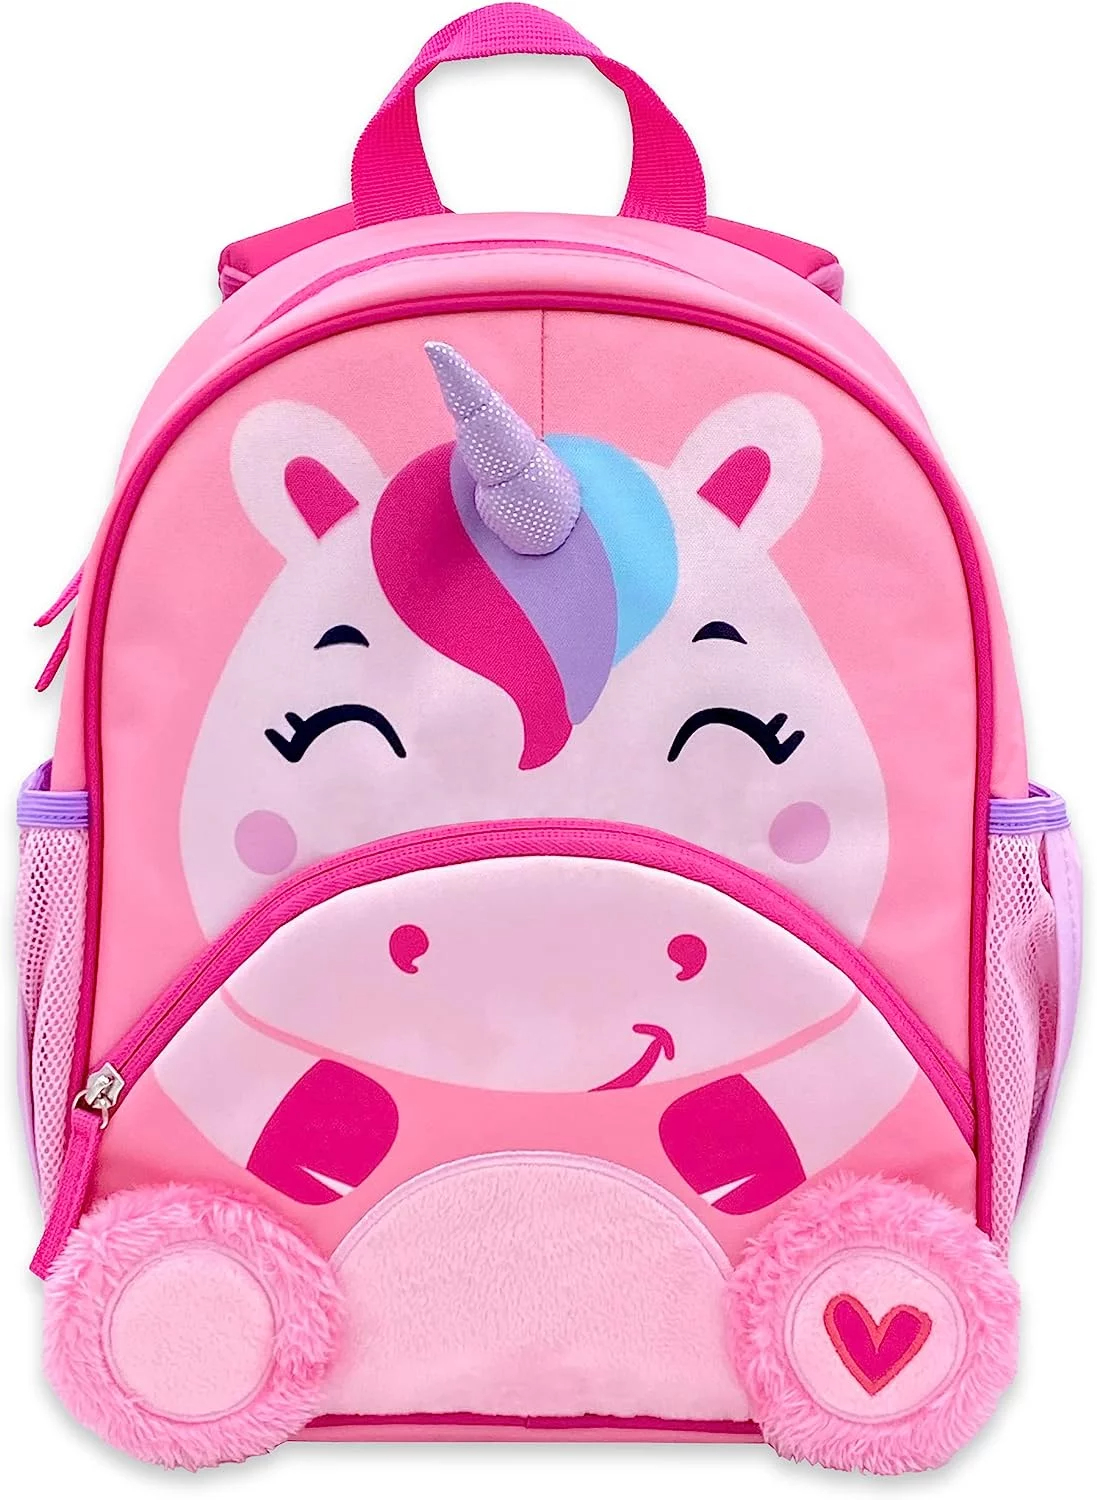 What size backpack for preschool插图4